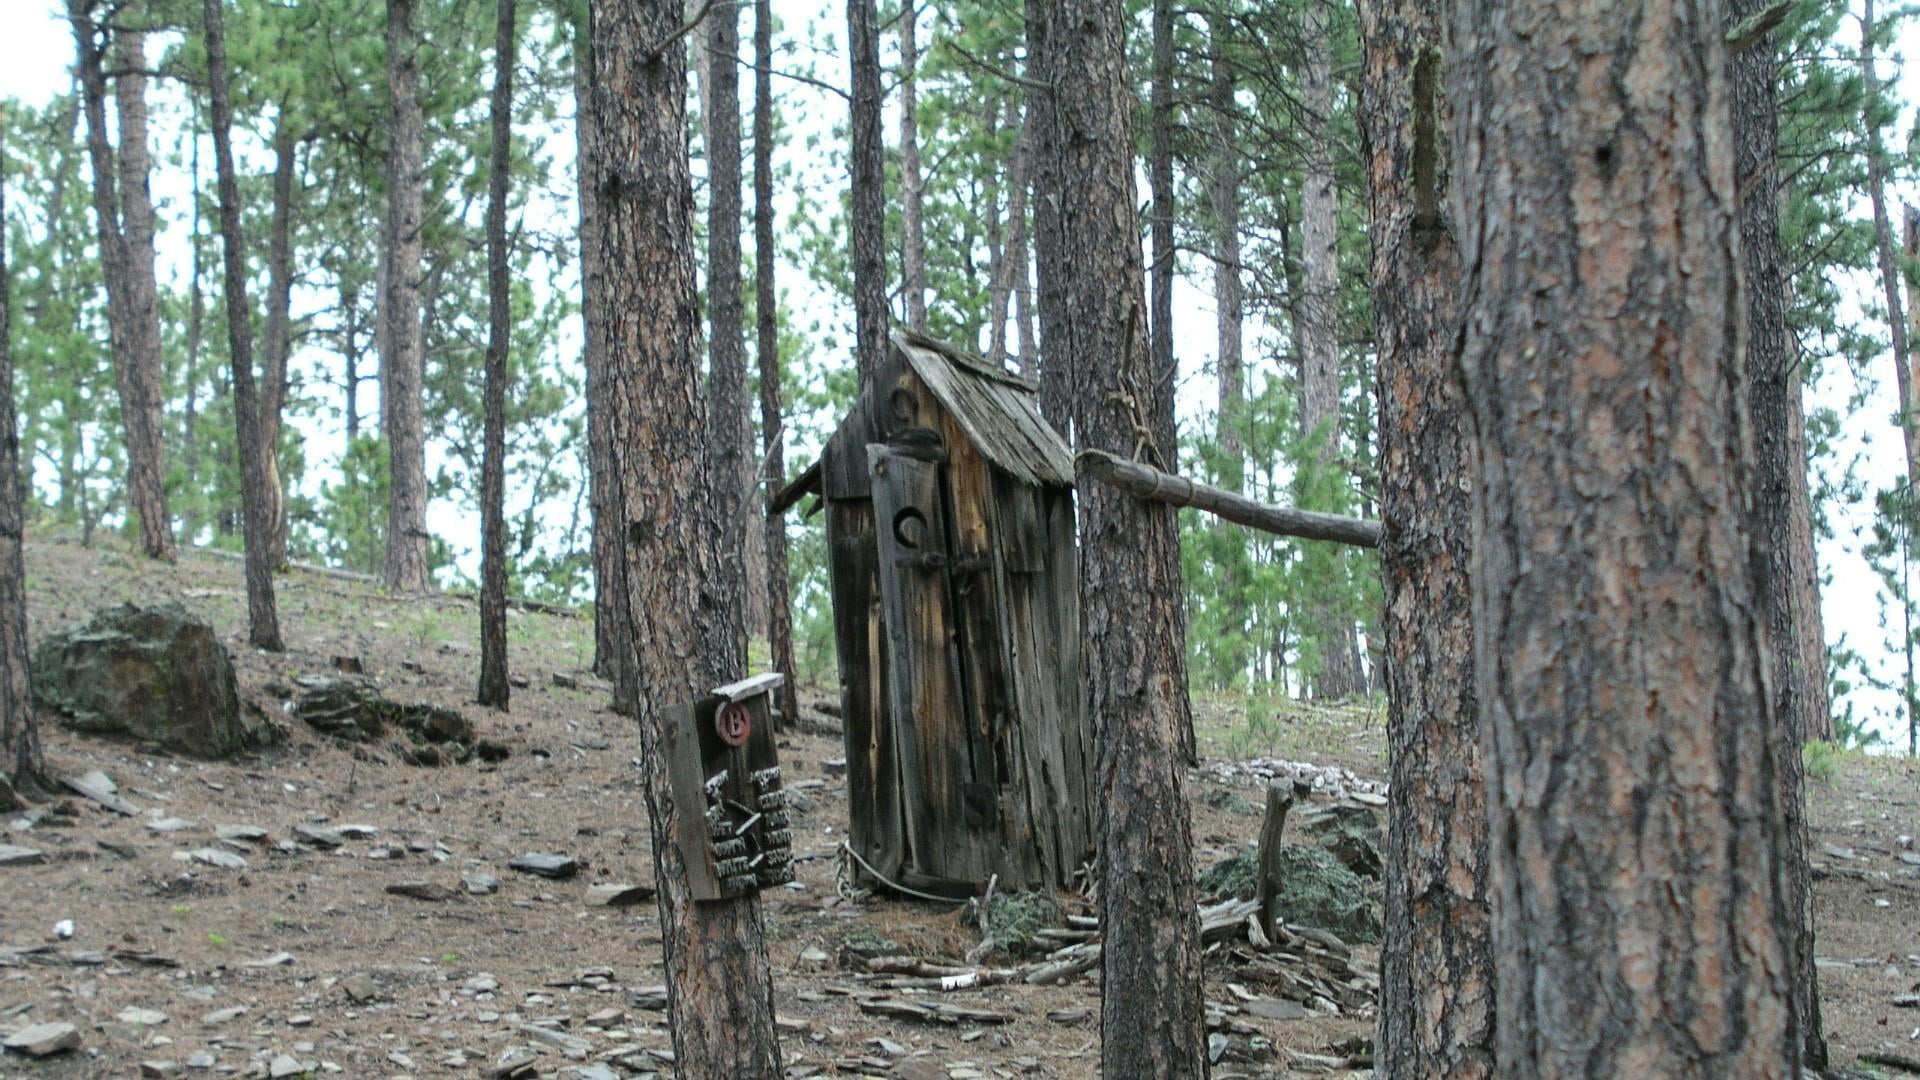 outhouse, restroom, forest, nature, tree, land, tree trunk